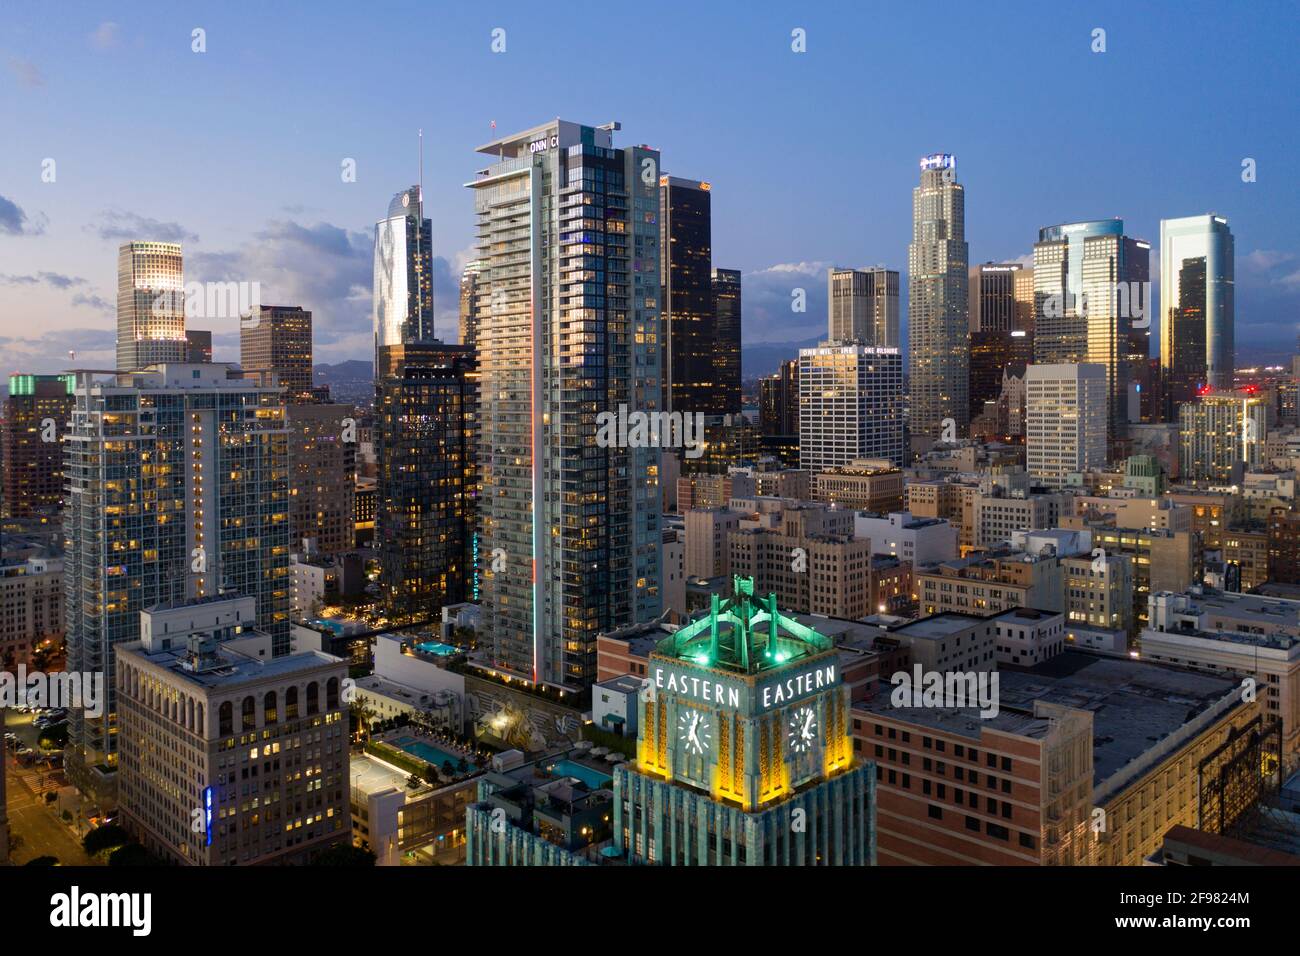 Historic core of downtown Los Angeles with Eastern building and city skyline at dusk Stock Photo